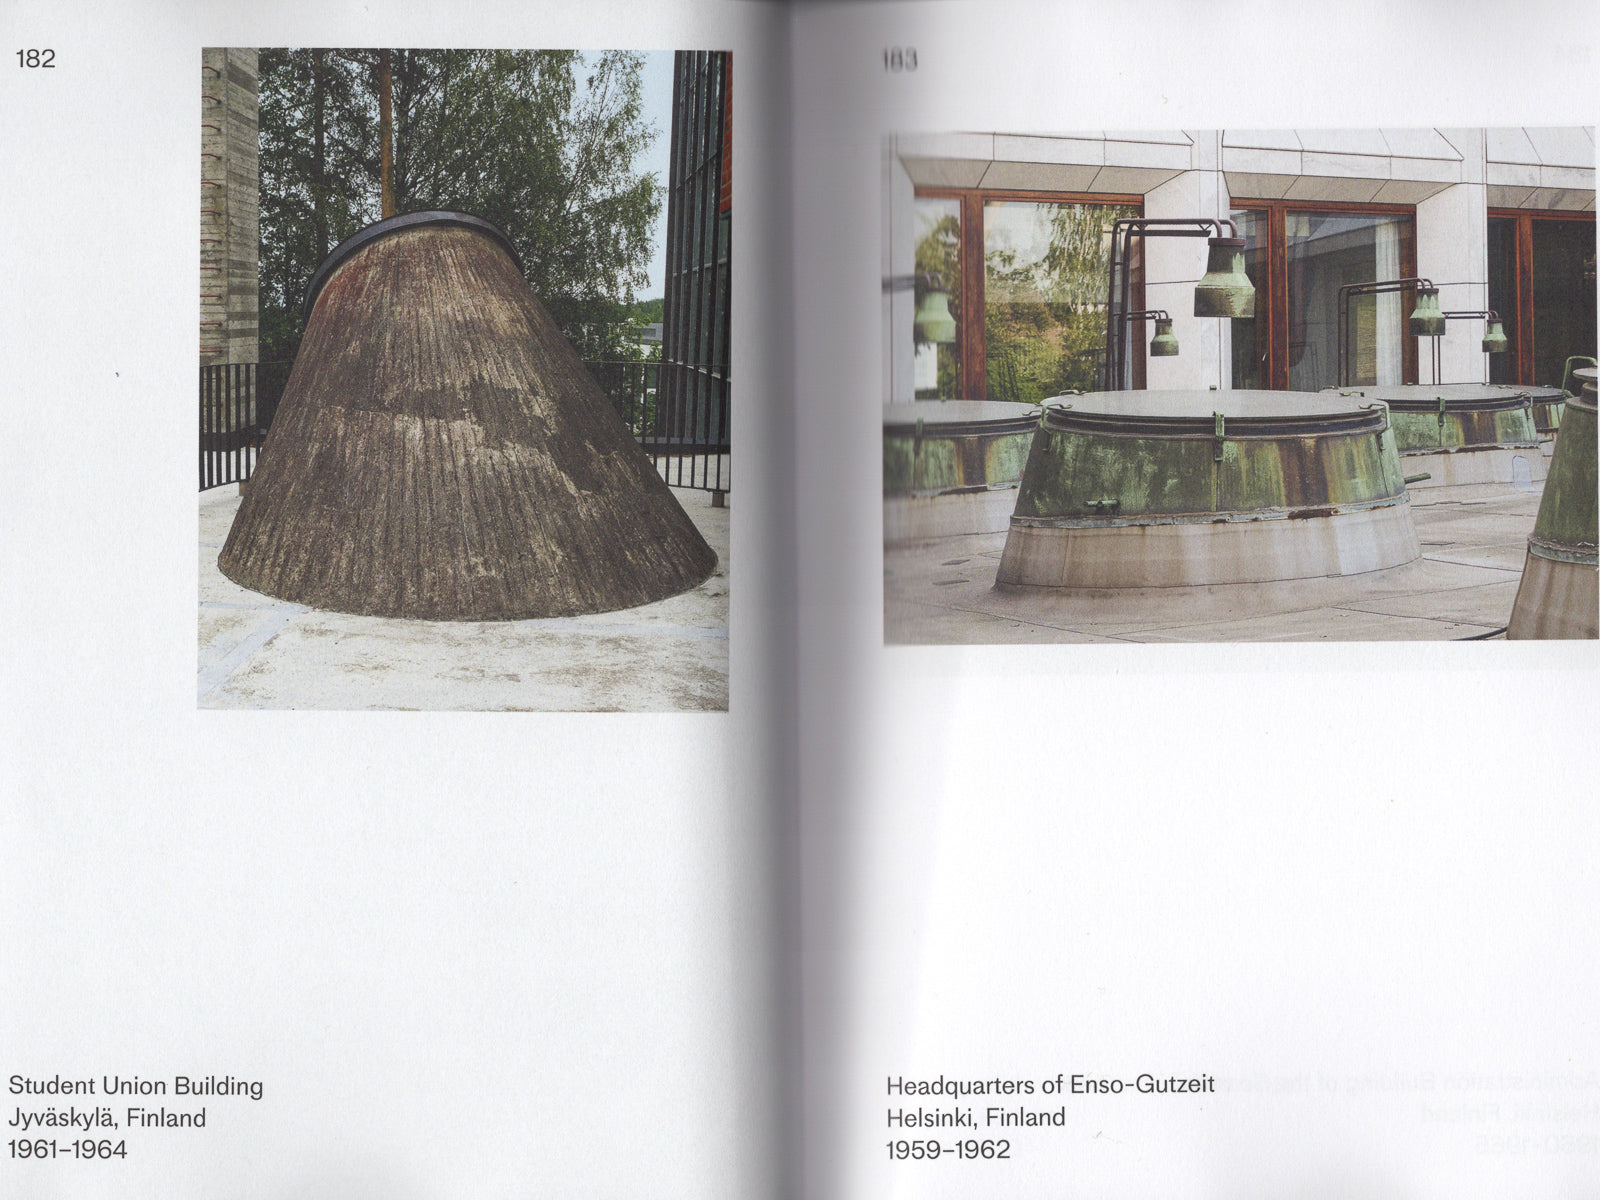 Aalto in Detail: A Catalogue of Components